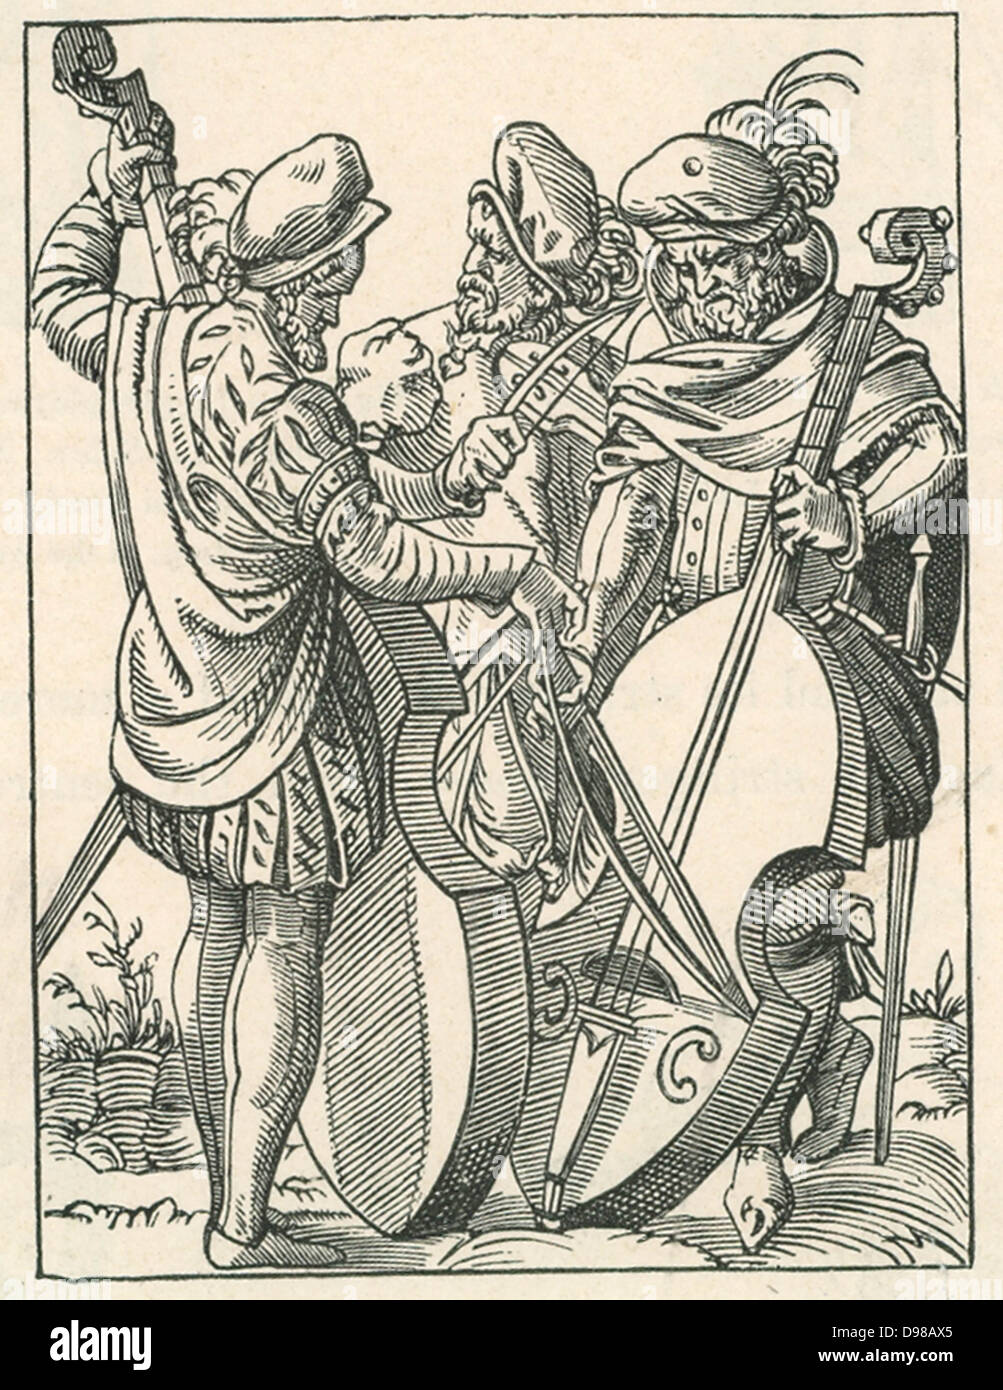 German musicians playing on stringed instruments of the violin family from a pocket violin, centre, to a bass viol. Woodcut by Jost Amman (1535-1591). Stock Photo